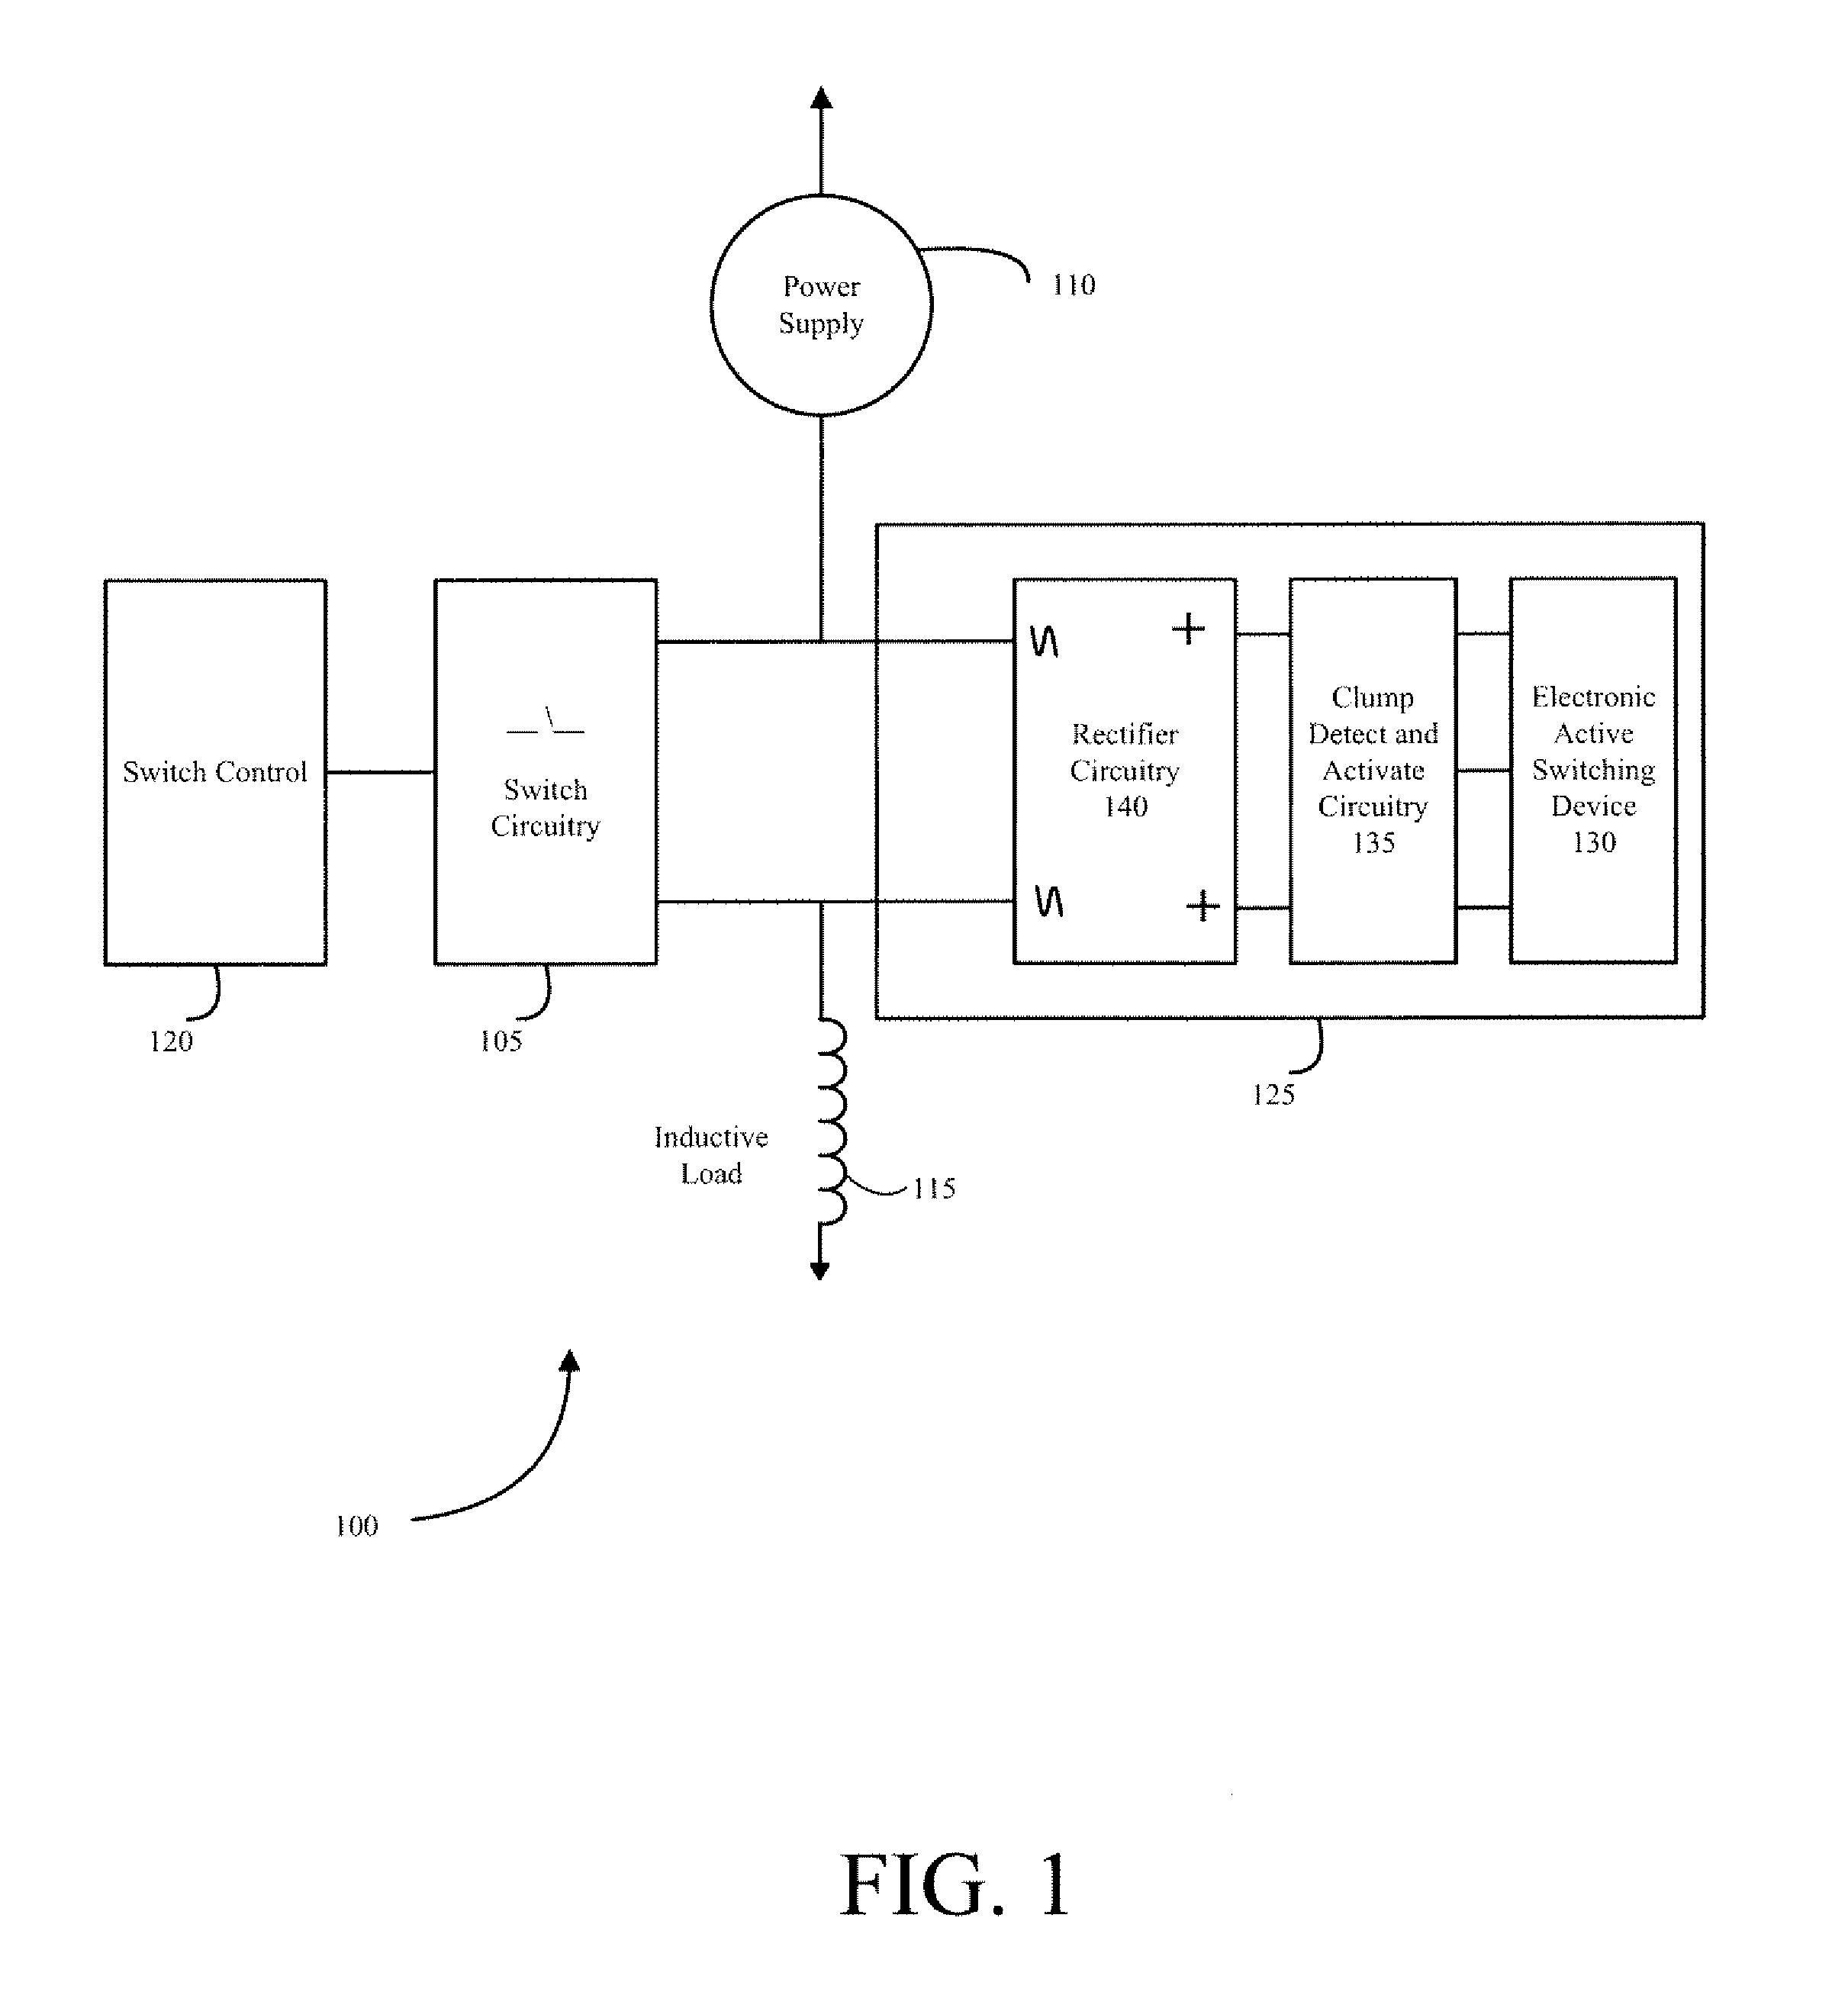 Systems, Methods, and Apparatus for Limiting Voltage Across a Switch